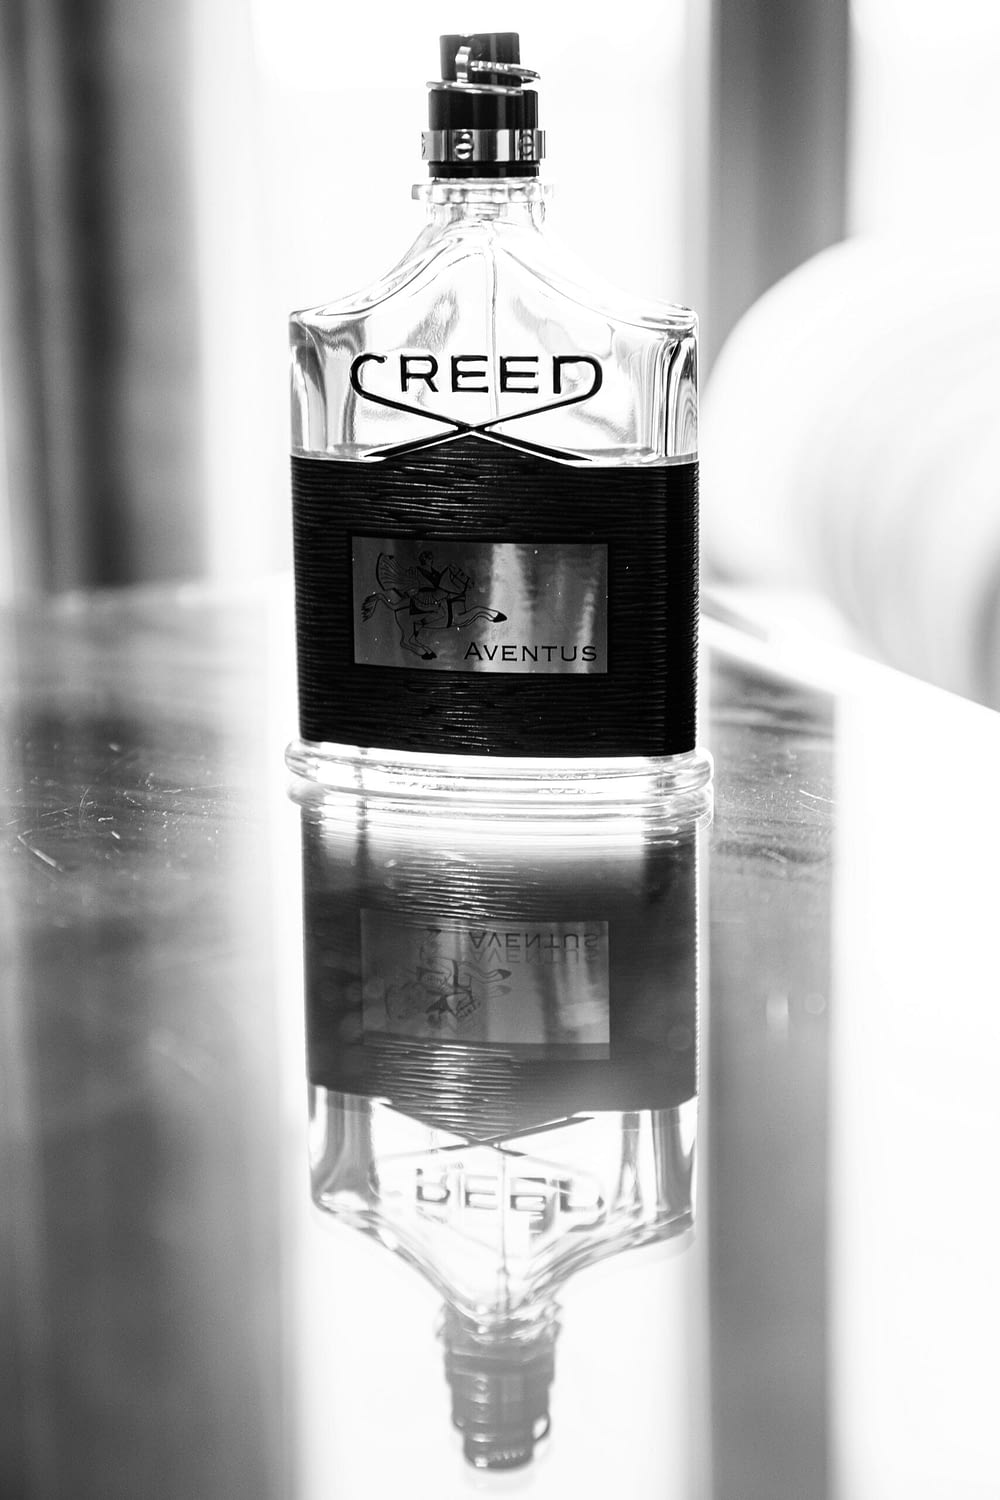 bottle of Creed aftershave on glass table